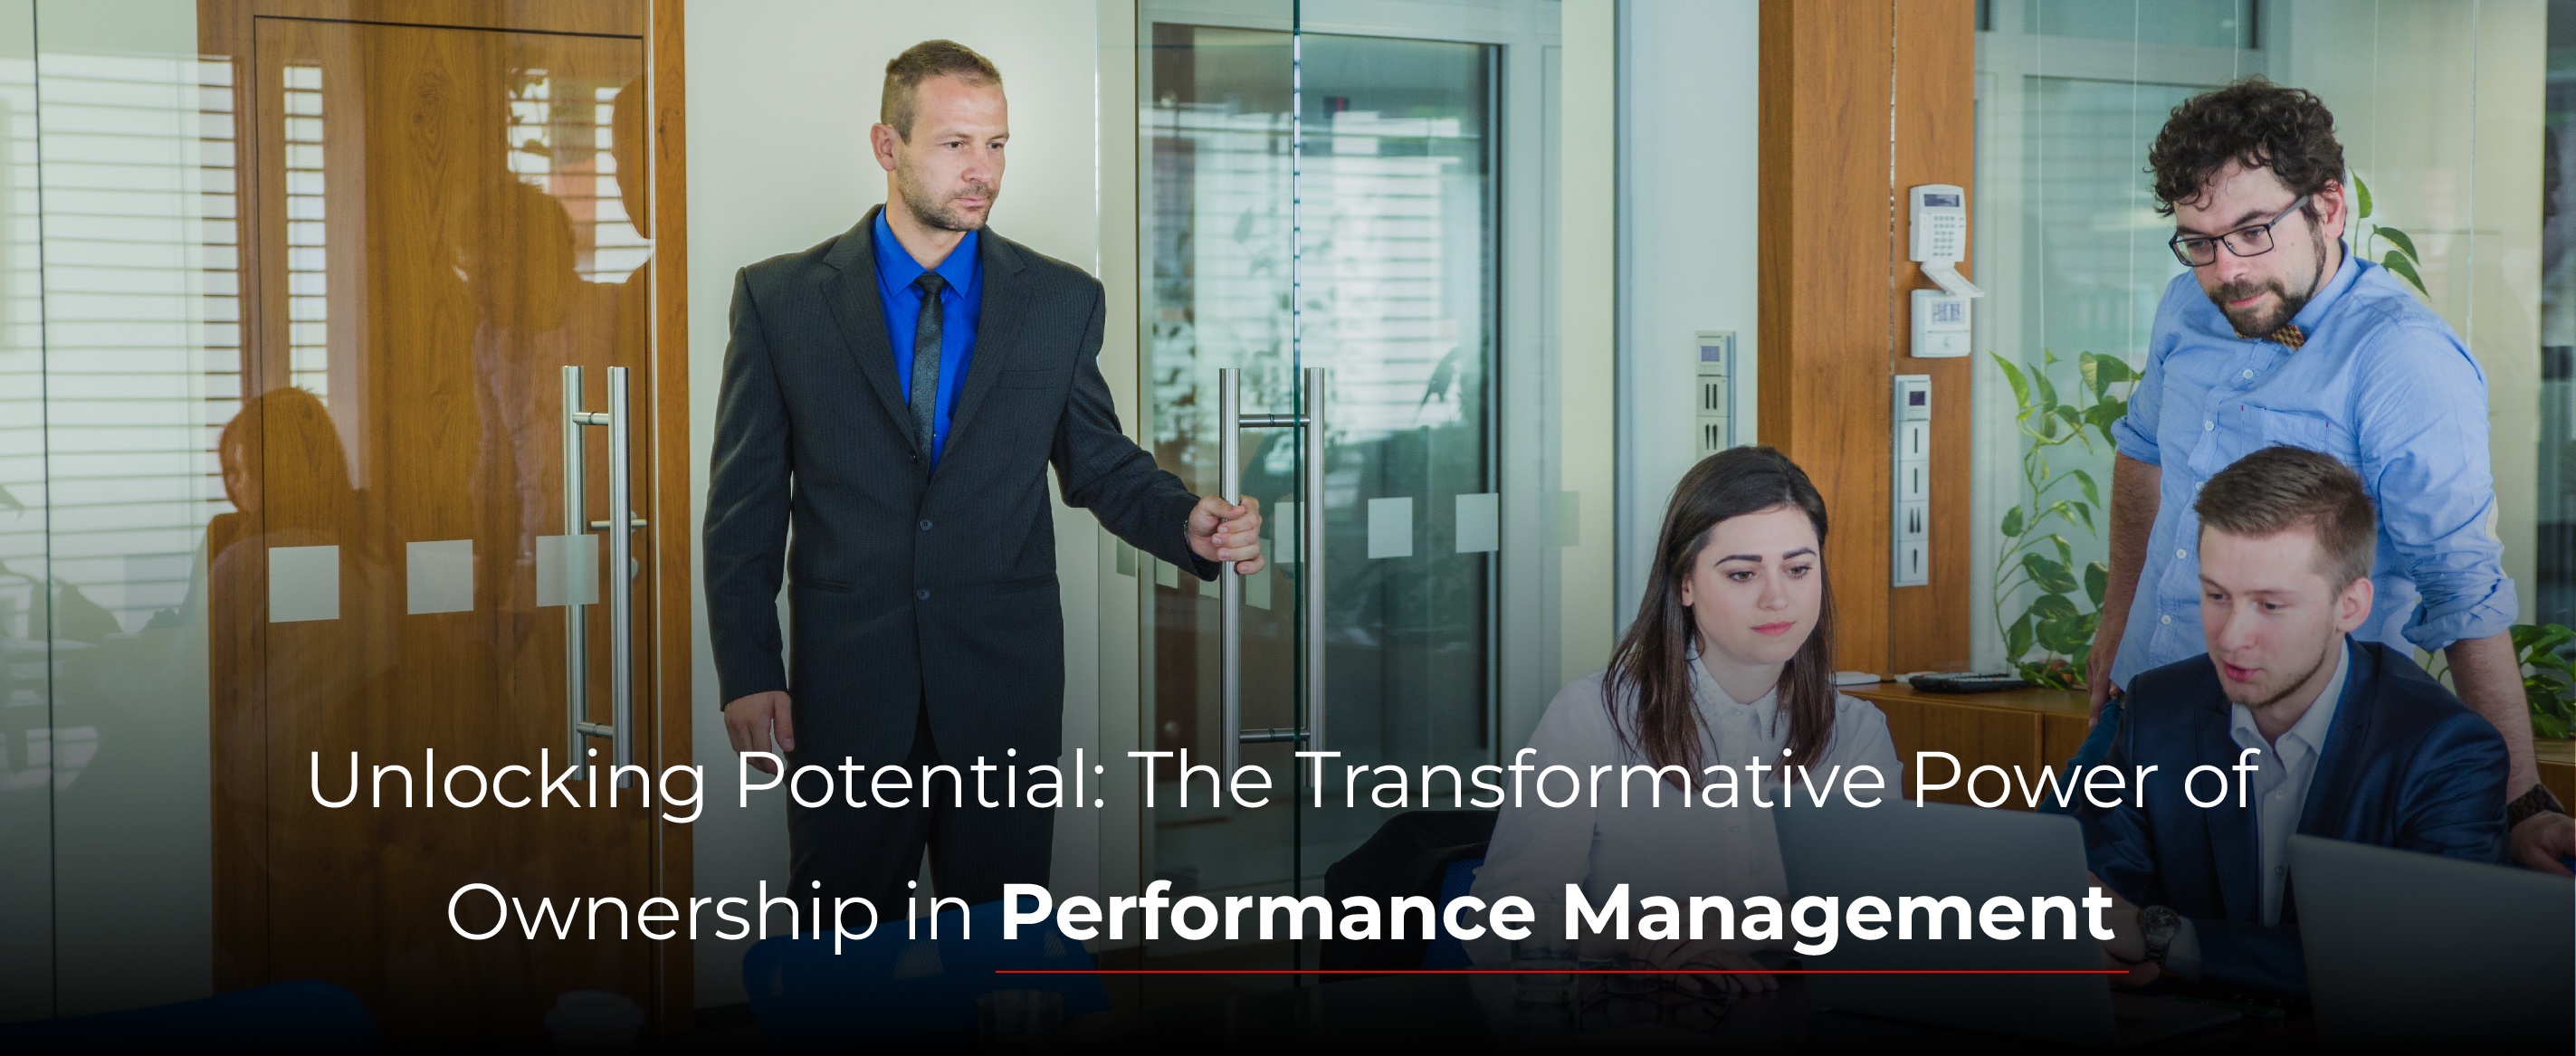 Transformative Power of Ownership in Performance Management